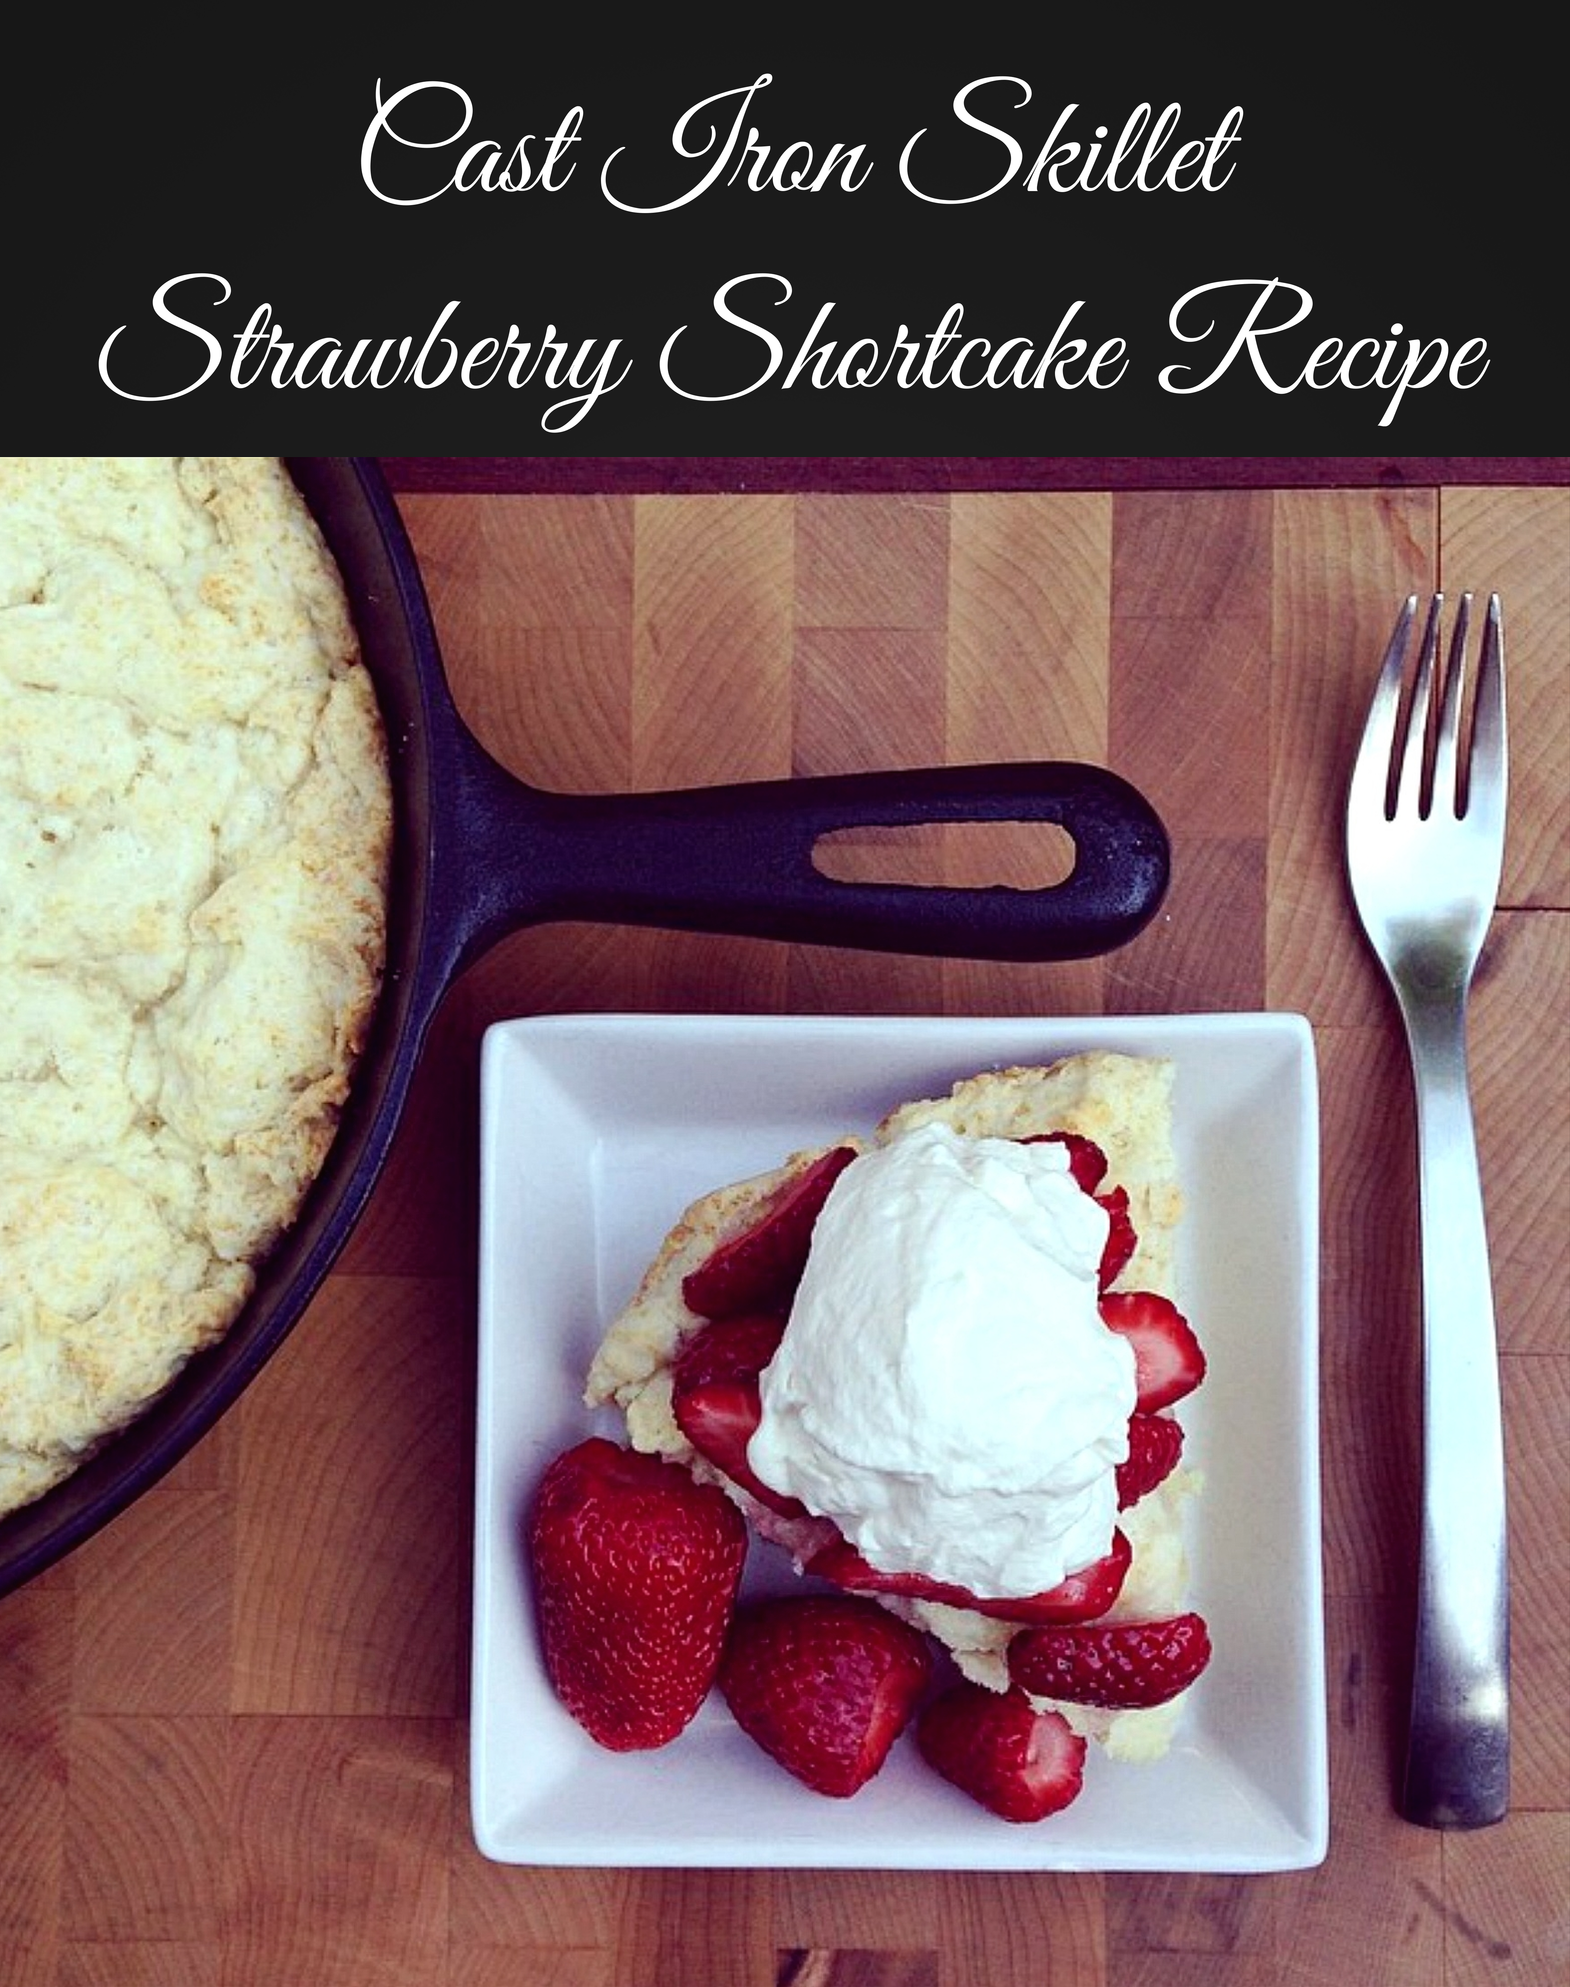 Cast Iron Skillet Strawberry Shortcake Recipe. The perfect summer treat with a biscuit or scone style shortcake